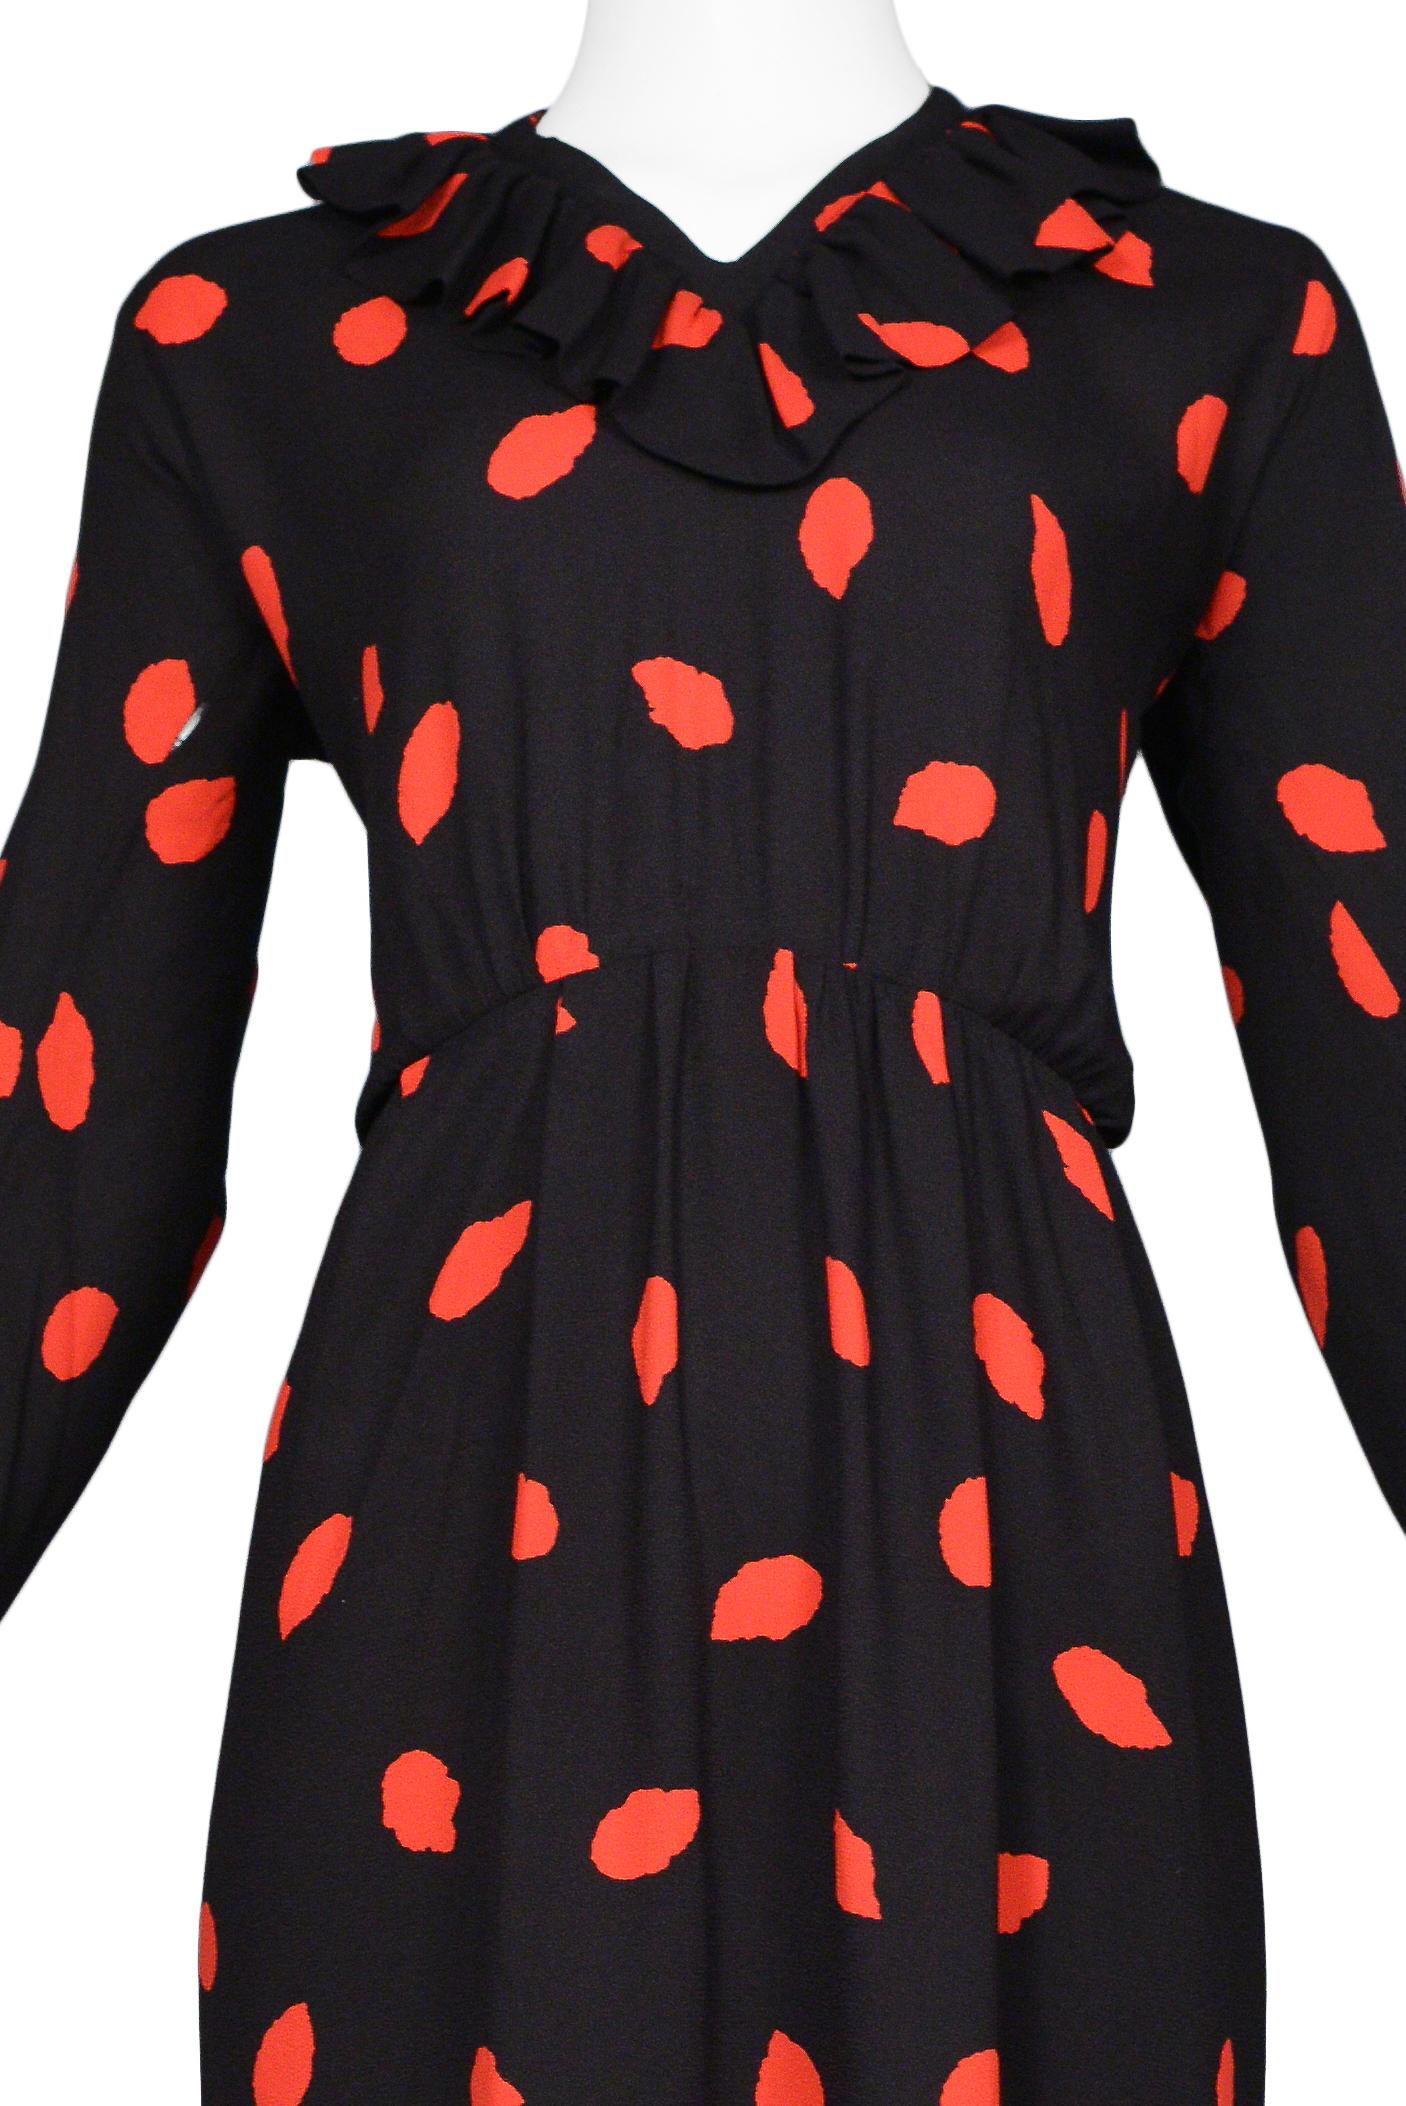 Yves Saint Laurent YSL Black & Red Print Silk Day Dress In Excellent Condition For Sale In Los Angeles, CA